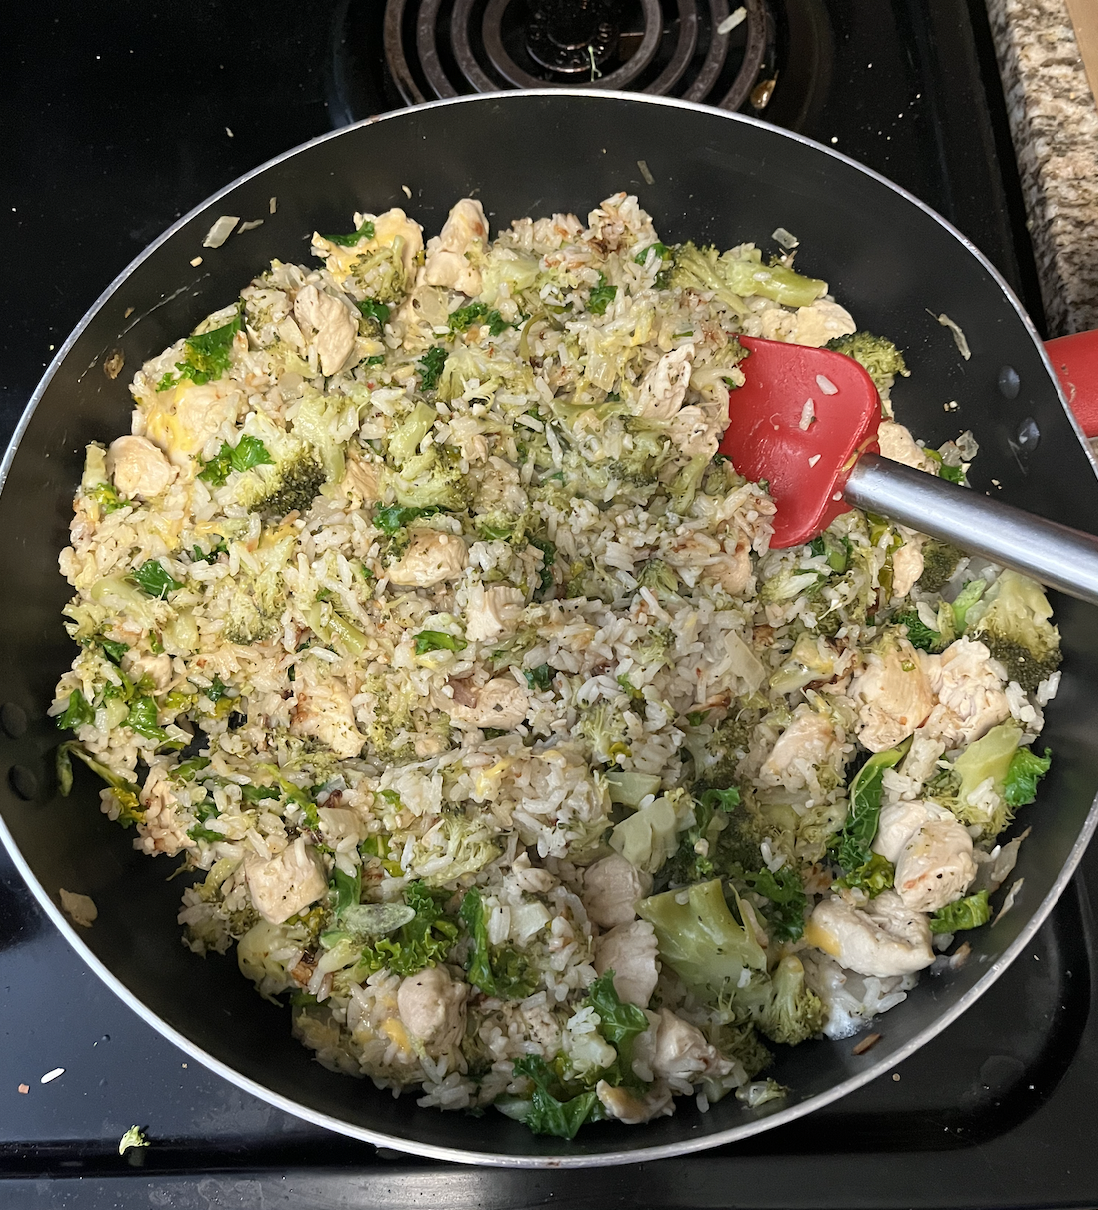 Chicken, rice, and broccoli in a pan